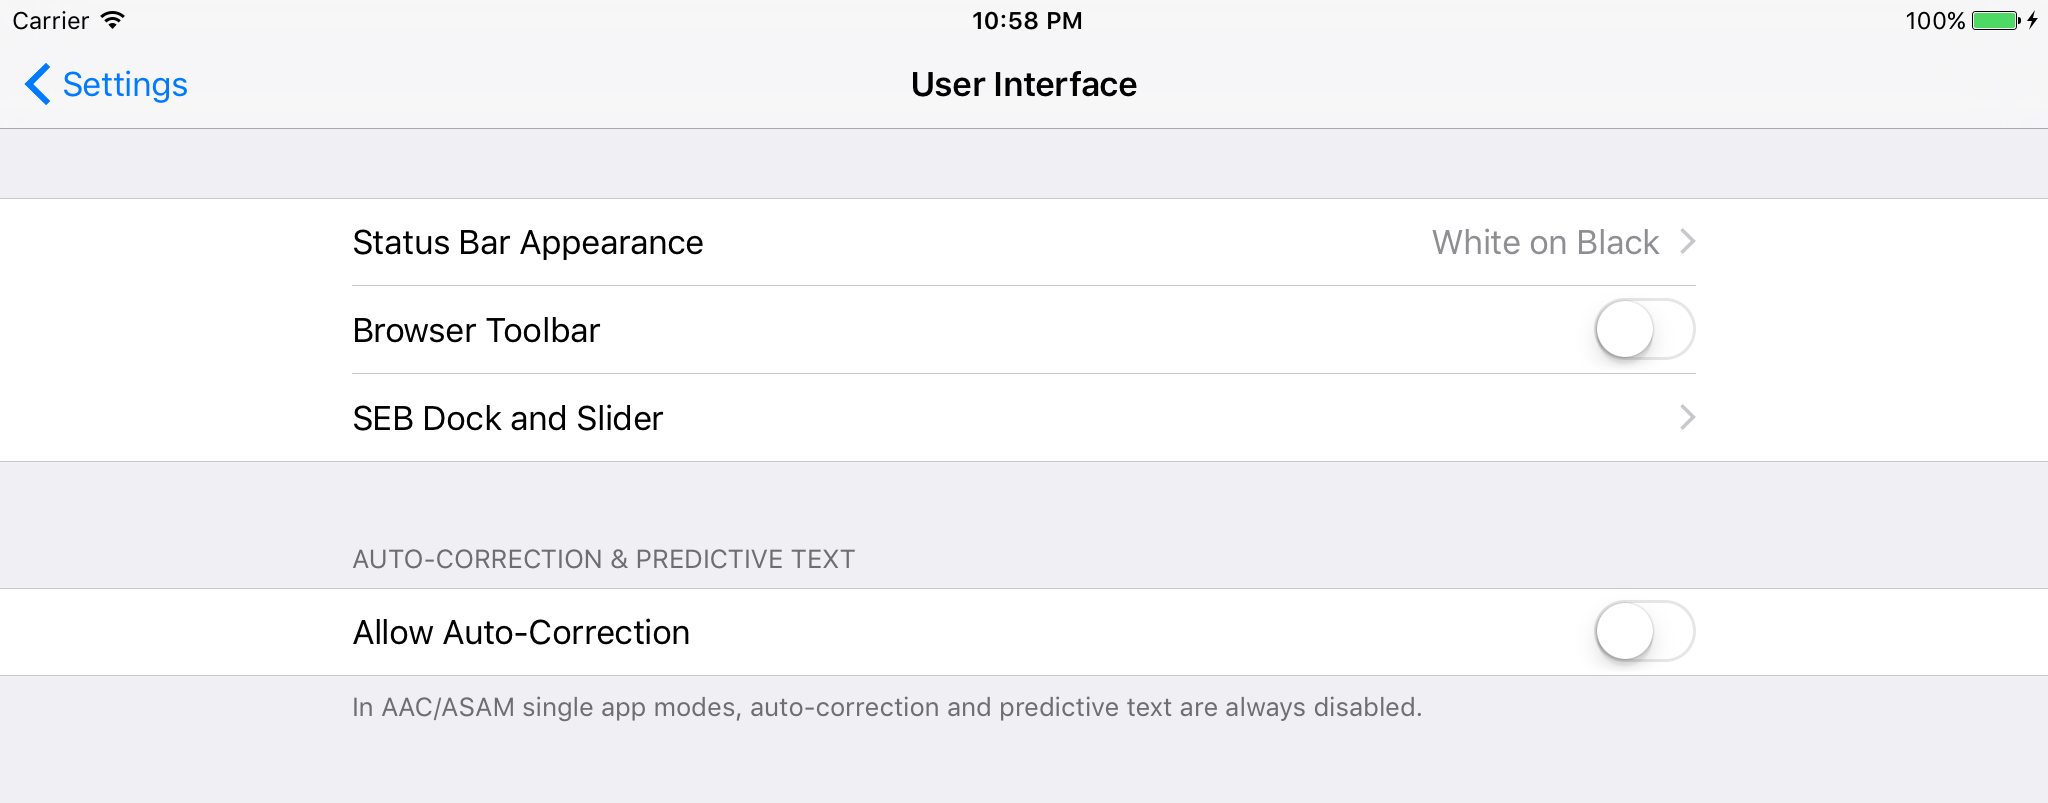 SEB Settings in User Interface Section